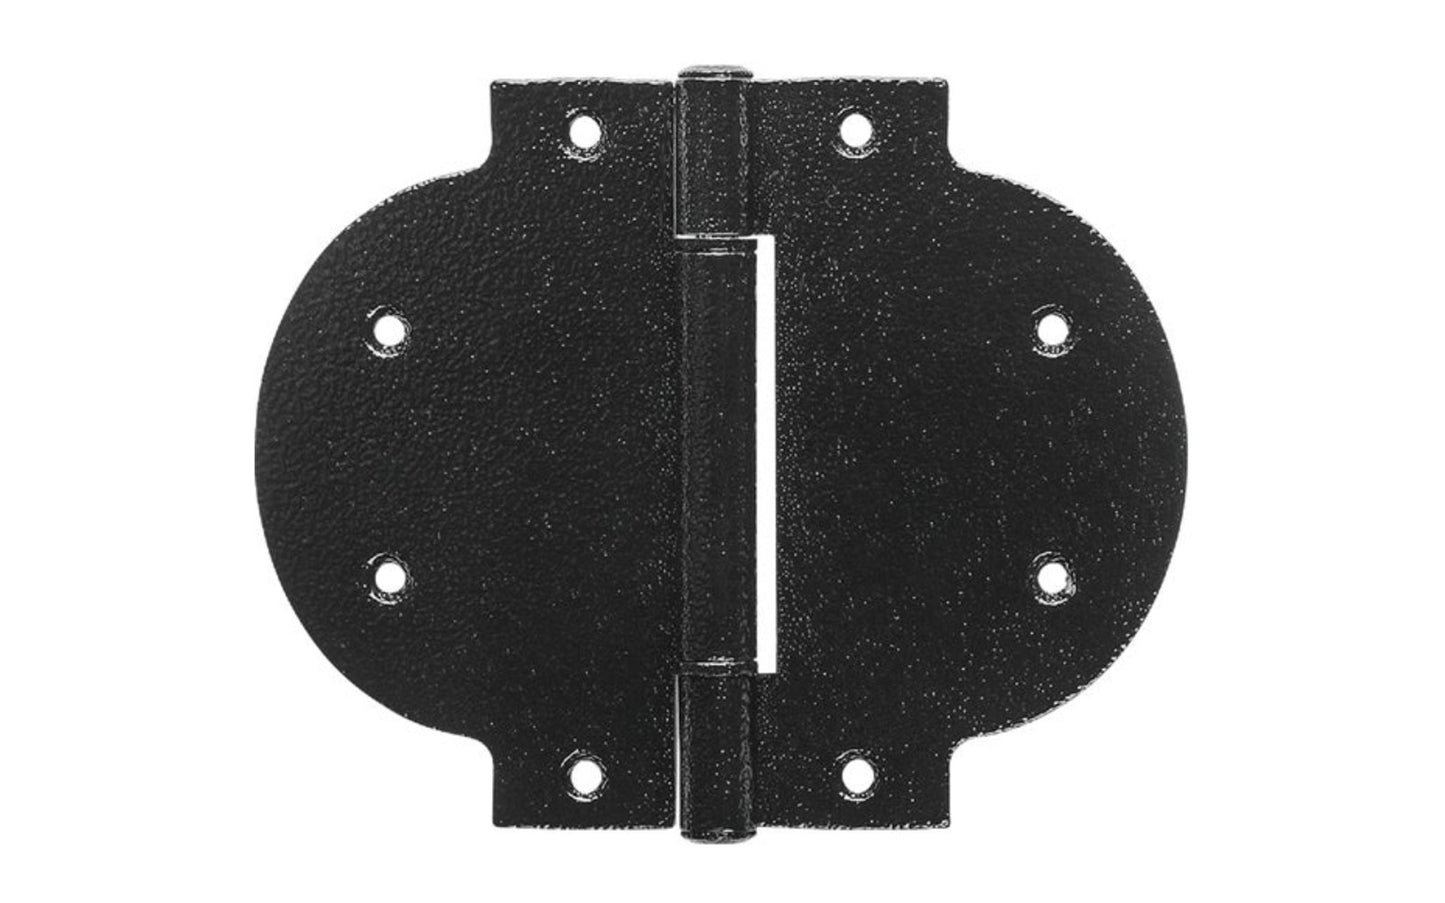 This 3-1/2" HD Black Finish Arched T-Hinge has a decorative arched design with texture powder coat, designed for applications with narrow mounting surfaces, such as gates, barn & shed doors, storage bins, & tool boxes. National Hardware Catalog Model N109-026. 886780017687